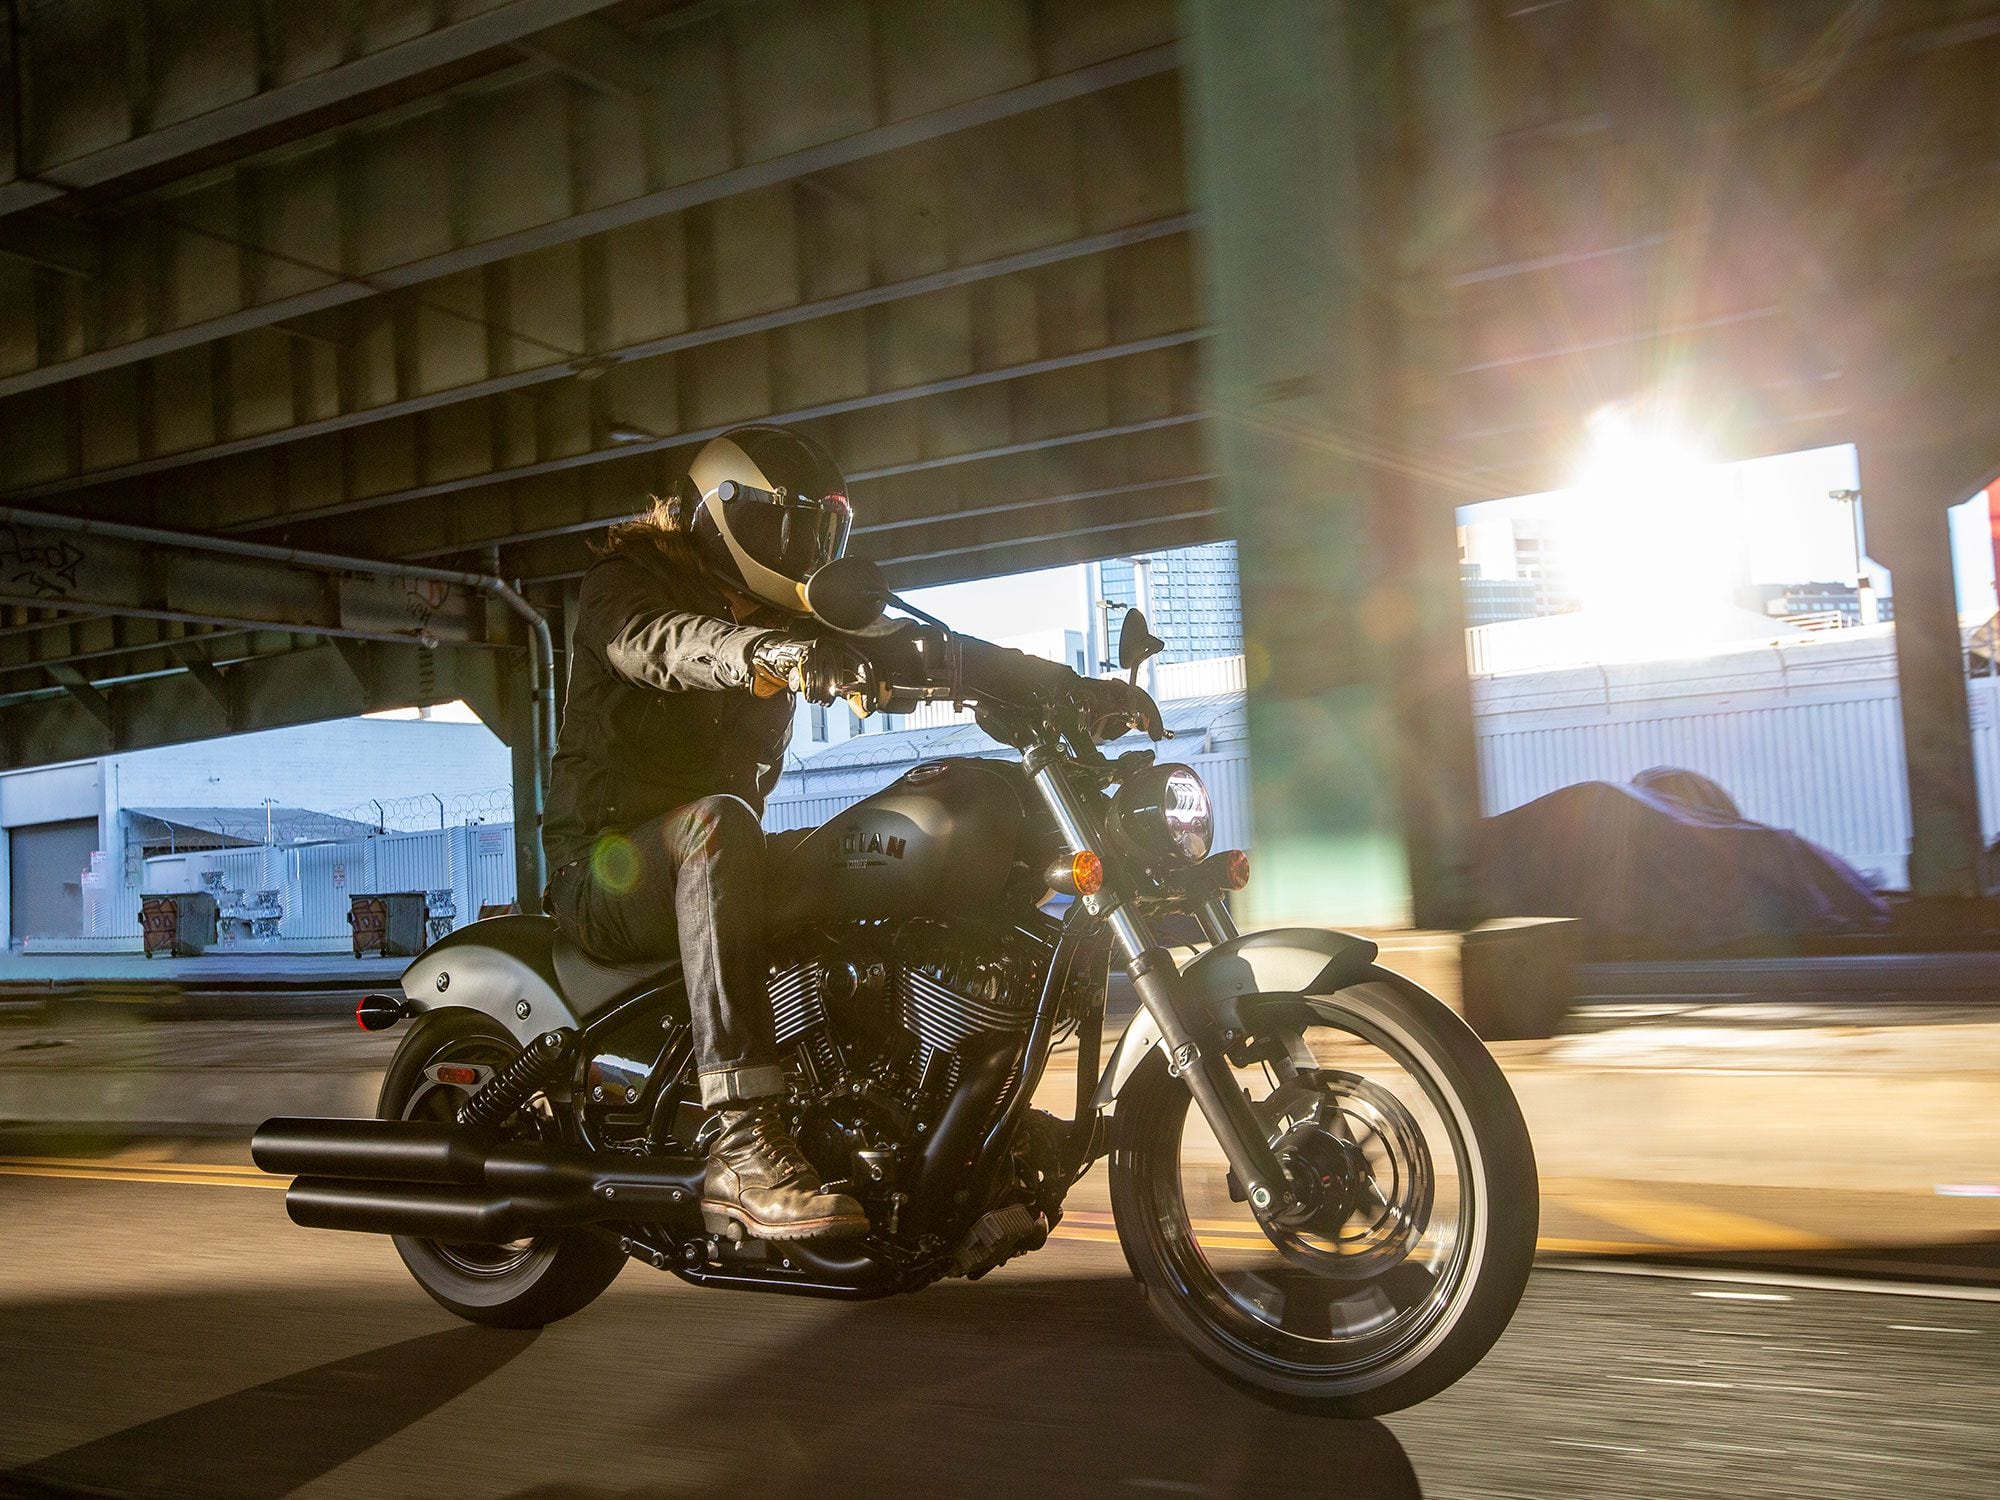 On city streets or open roads, the Chief Dark Horse quickly finds its stride.